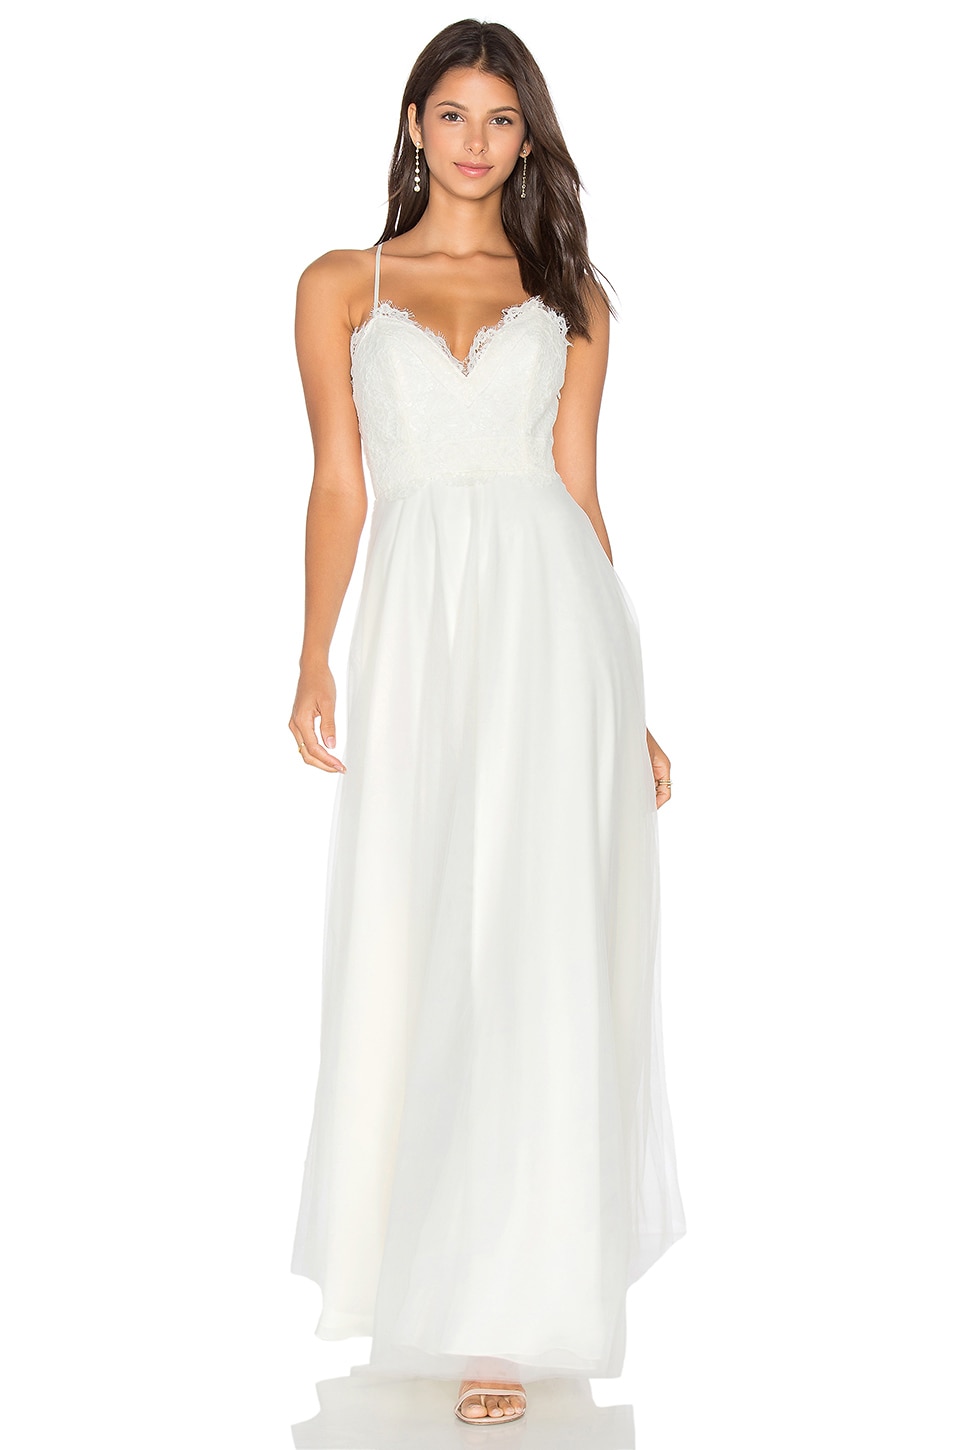 Lovers and Friends x REVOLVE Orchard Gown in White | REVOLVE